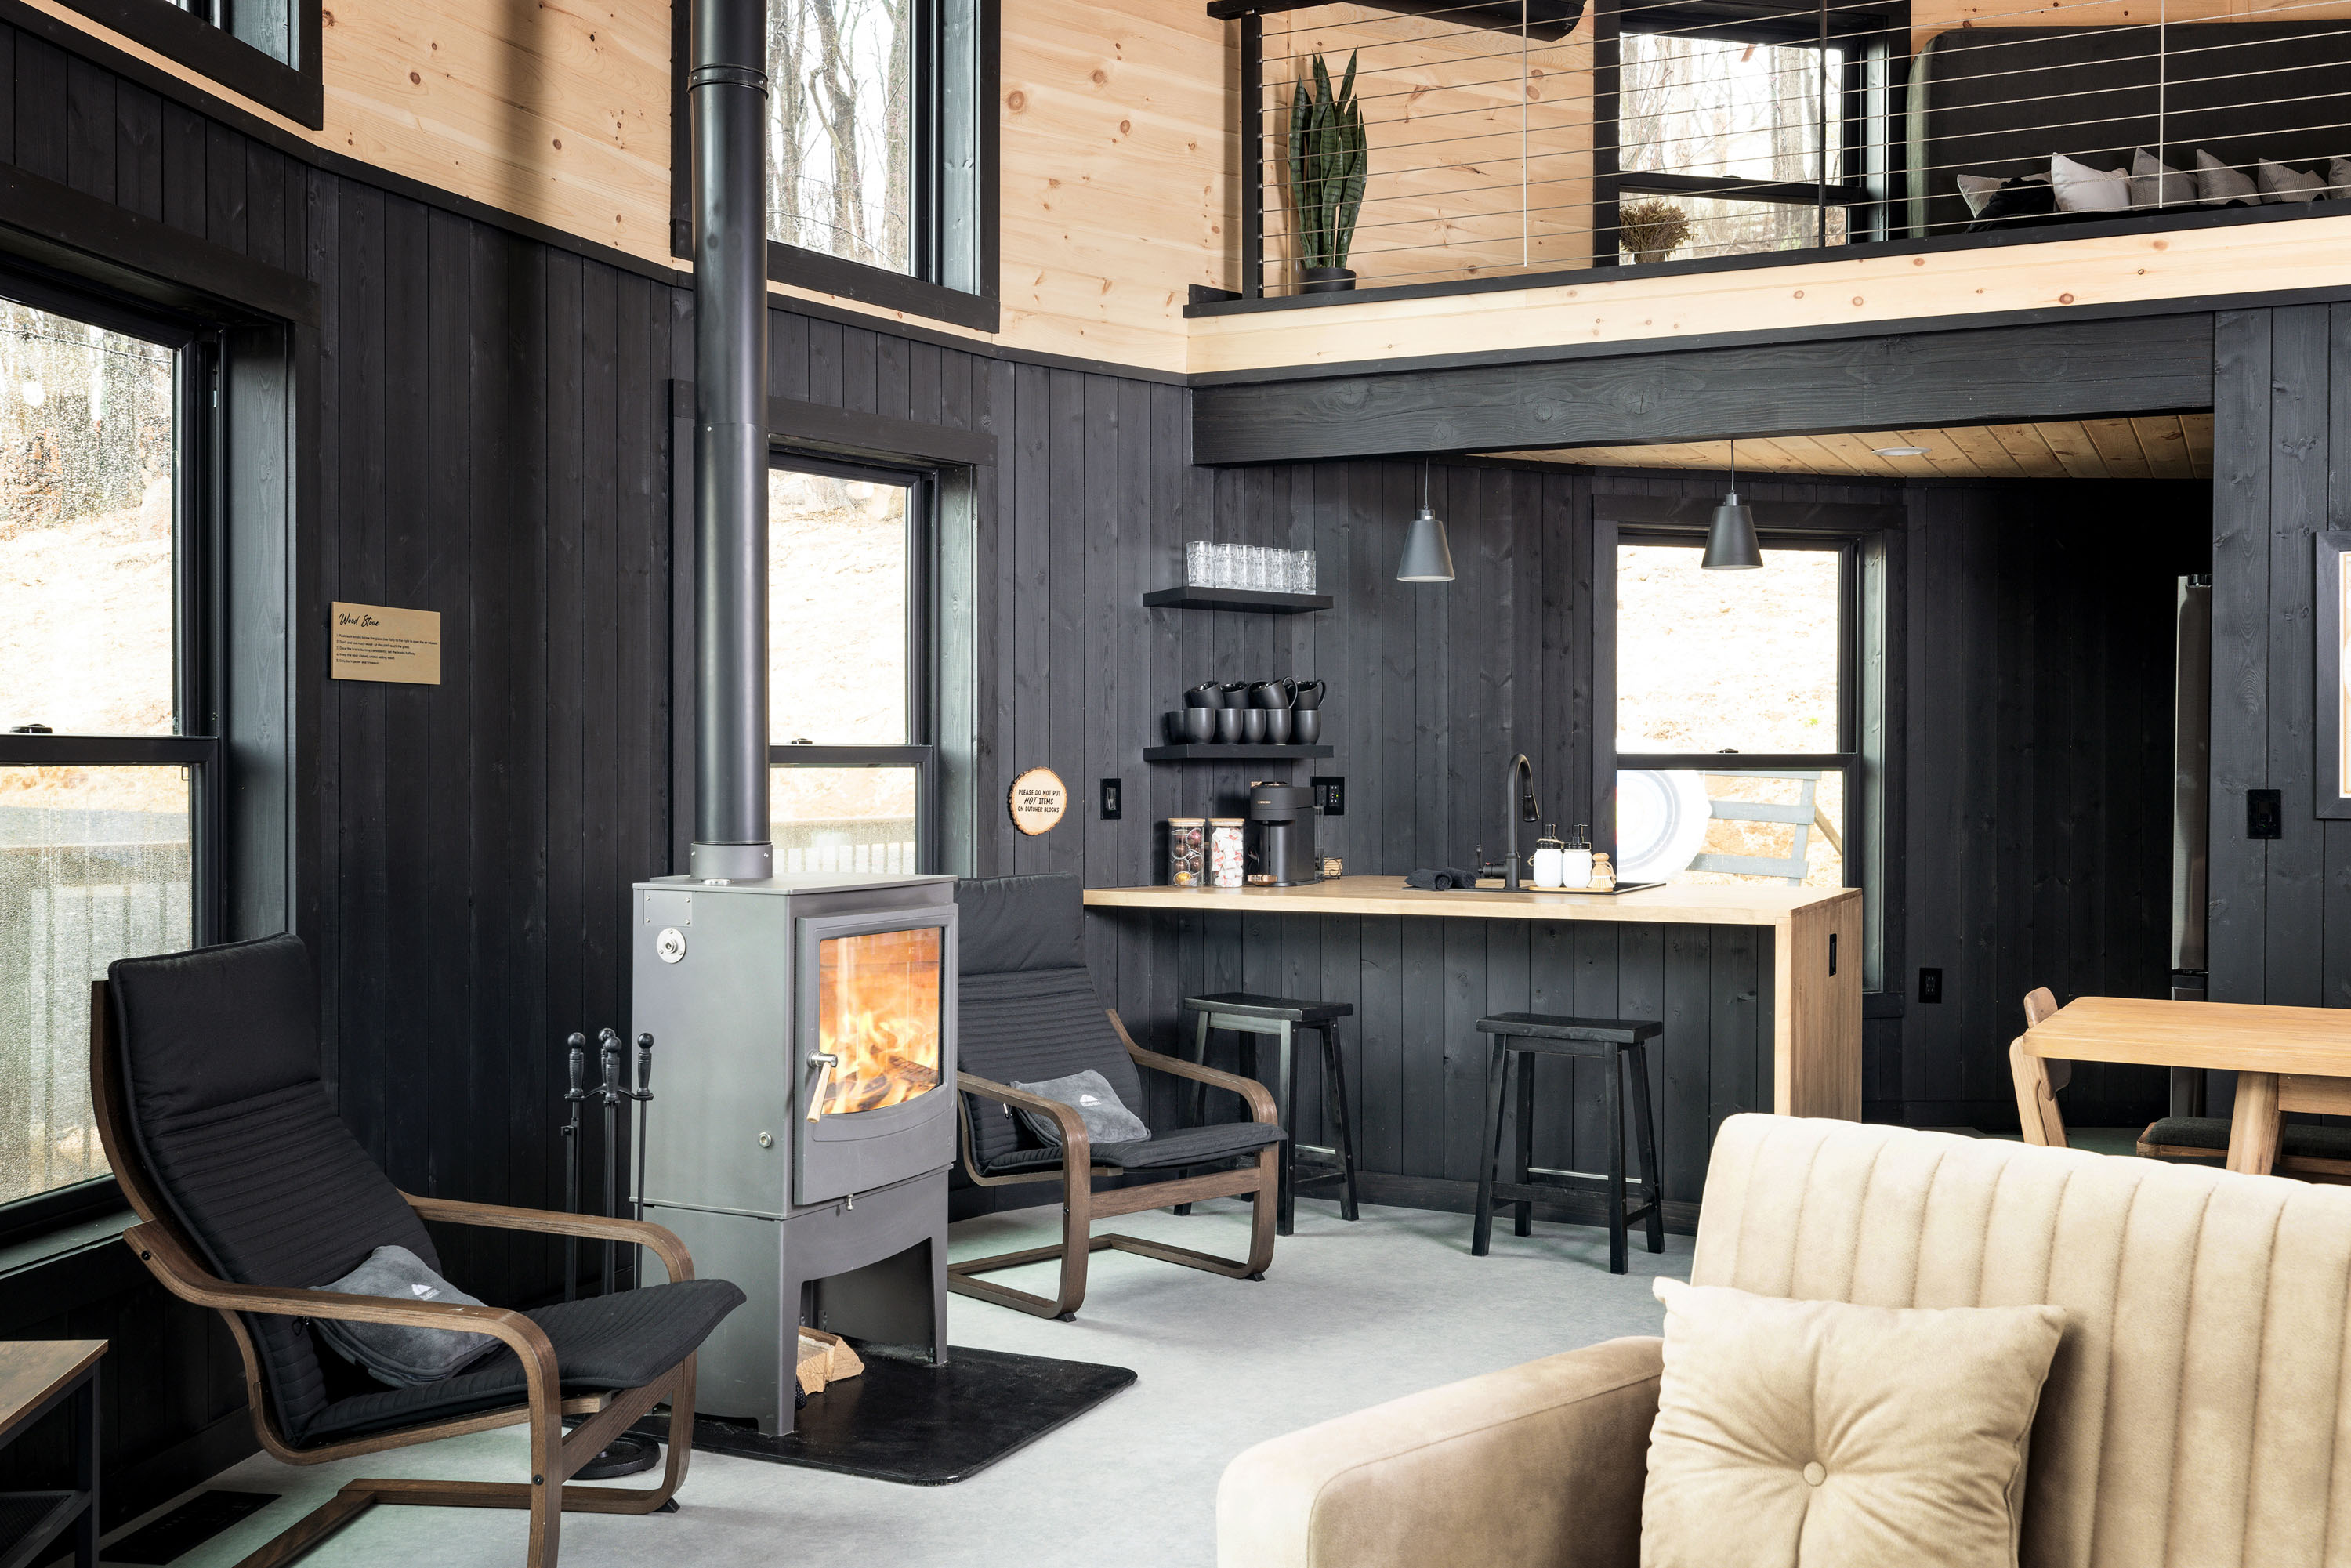 <span  class="uc_style_uc_tiles_grid_image_elementor_uc_items_attribute_title" style="color:#ffffff;">Lounger Chairs, Wood Stove, Kitchen Island, Modern Black-Yellow Interior, Sofa - Skyline Yurt</span>